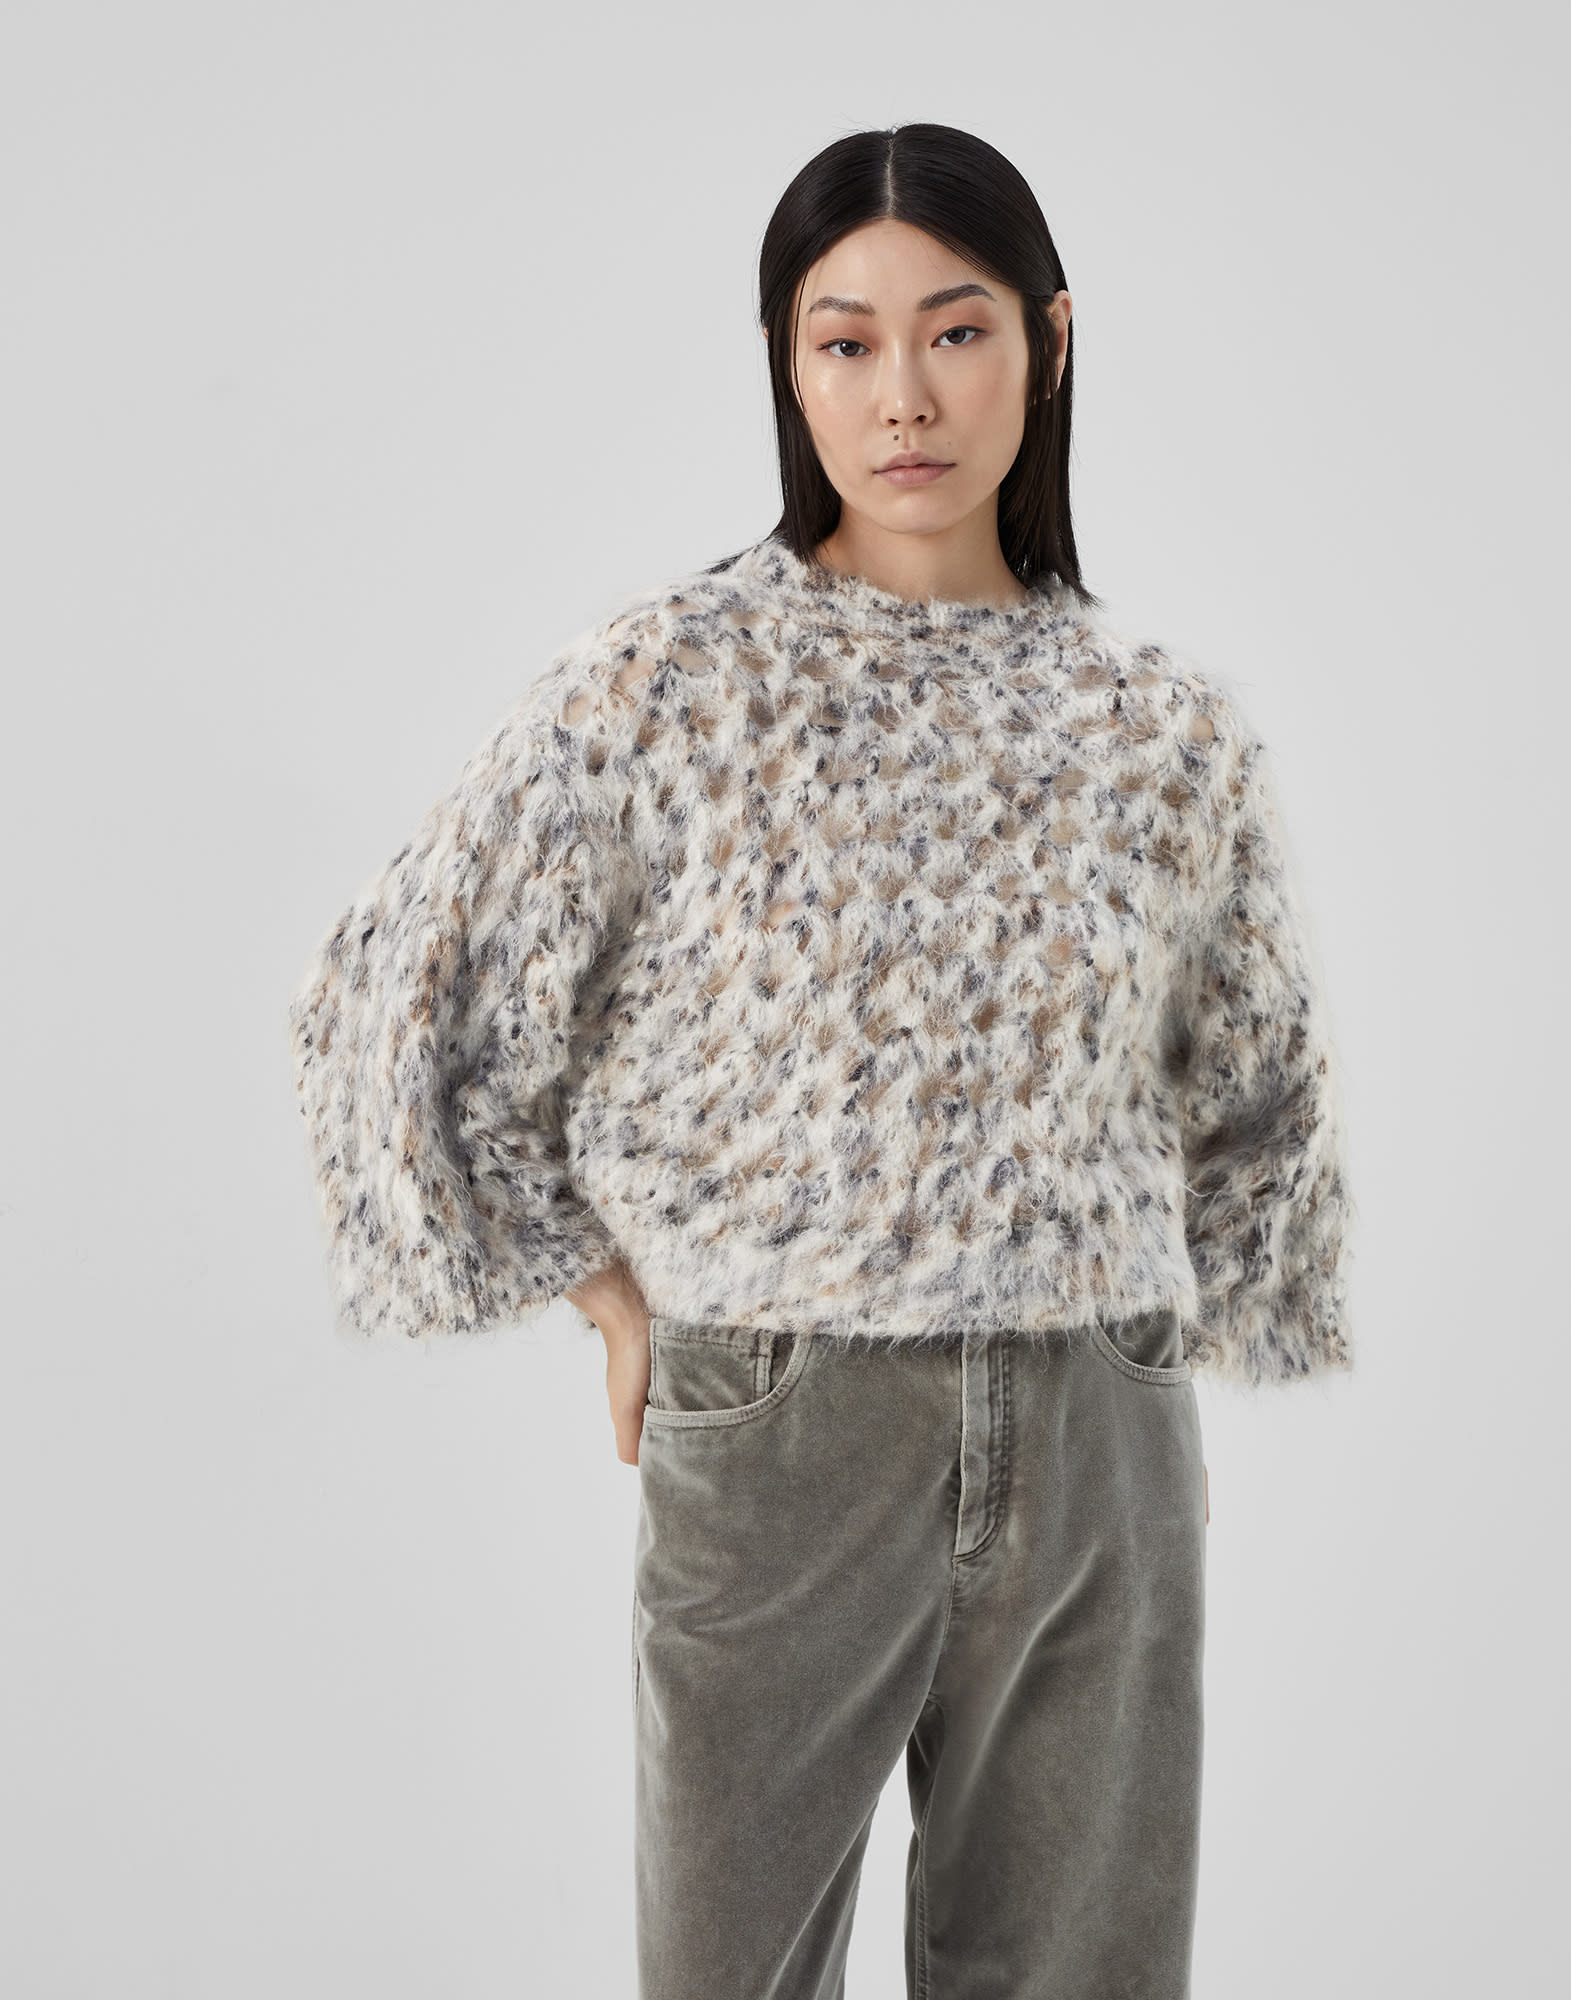 Mohair, wool and cotton sweater